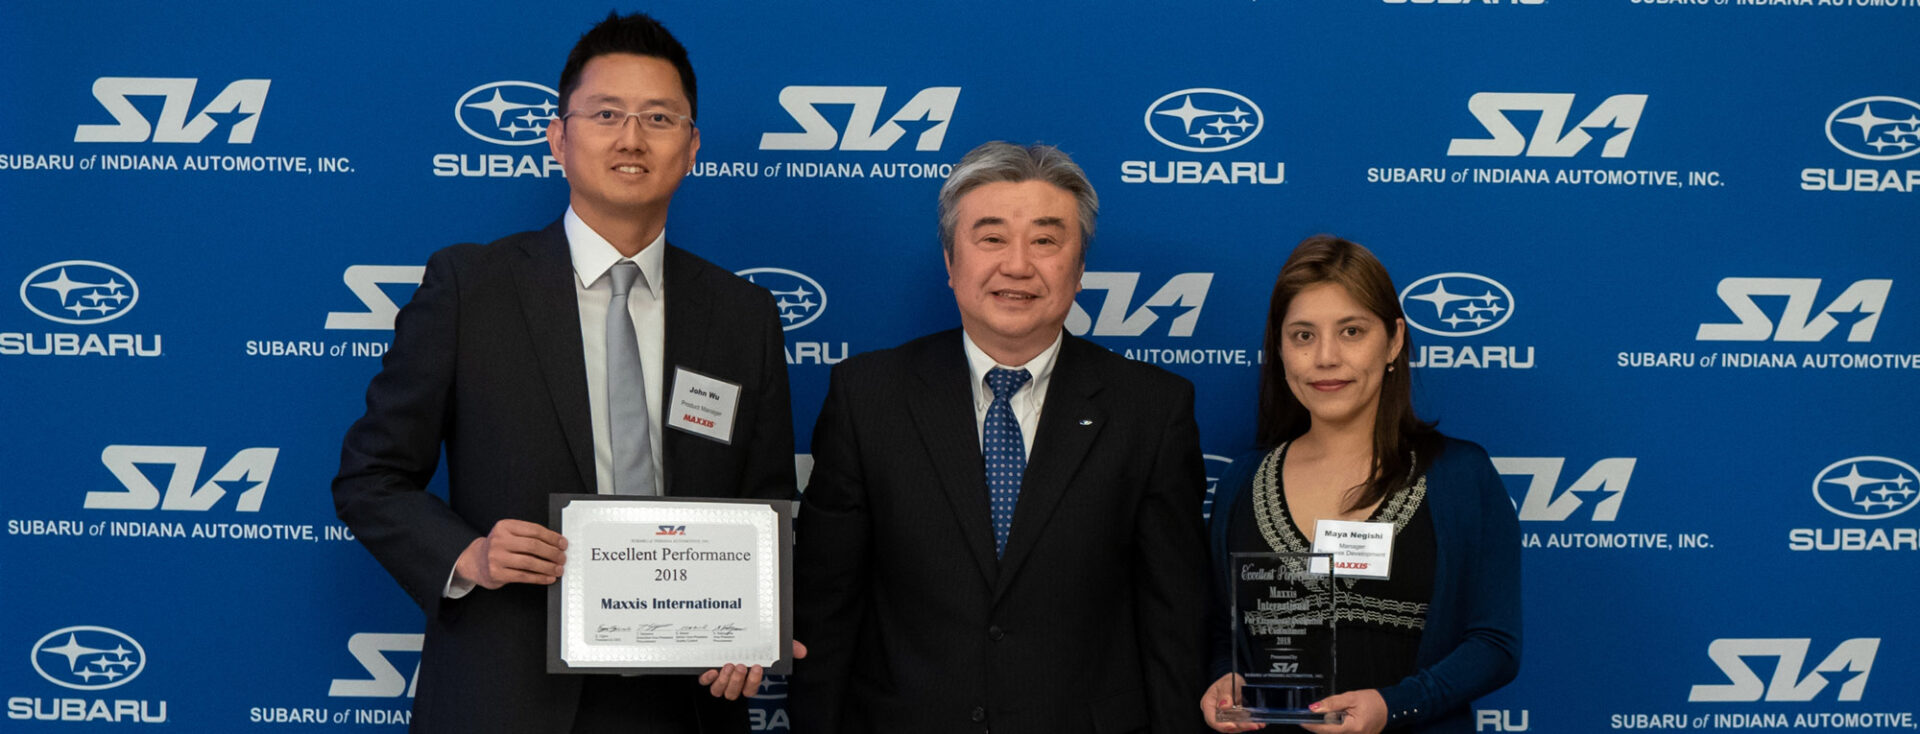 Maxxis receives Excellent Performance Supplier Award from Subaru of Indiana.